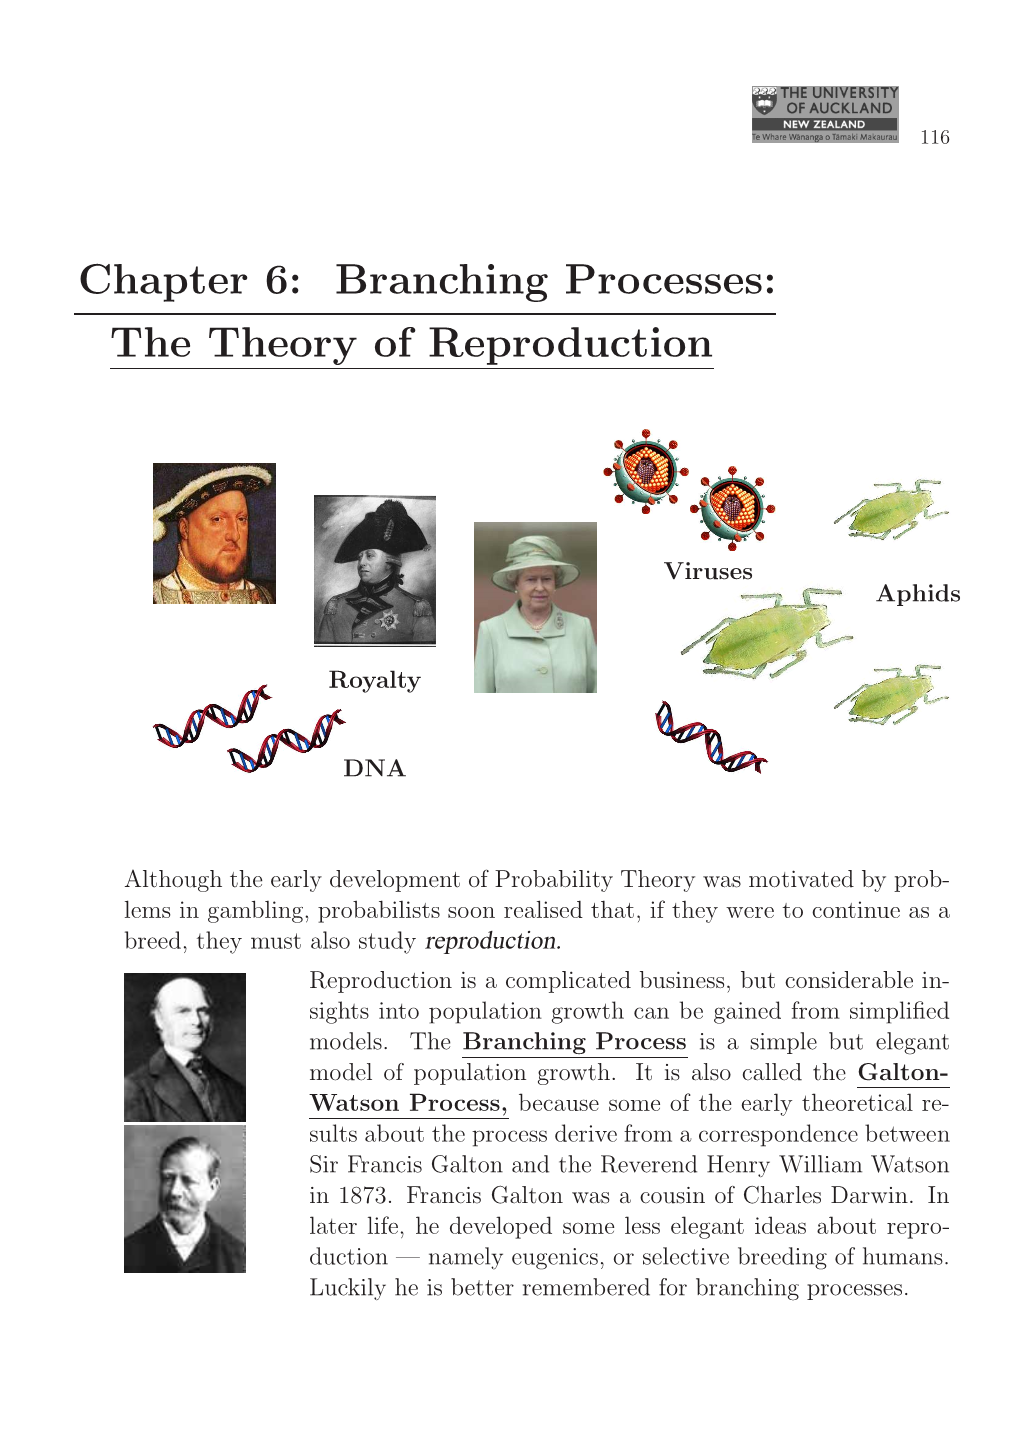 Chapter 6: Branching Processes: the Theory of Reproduction